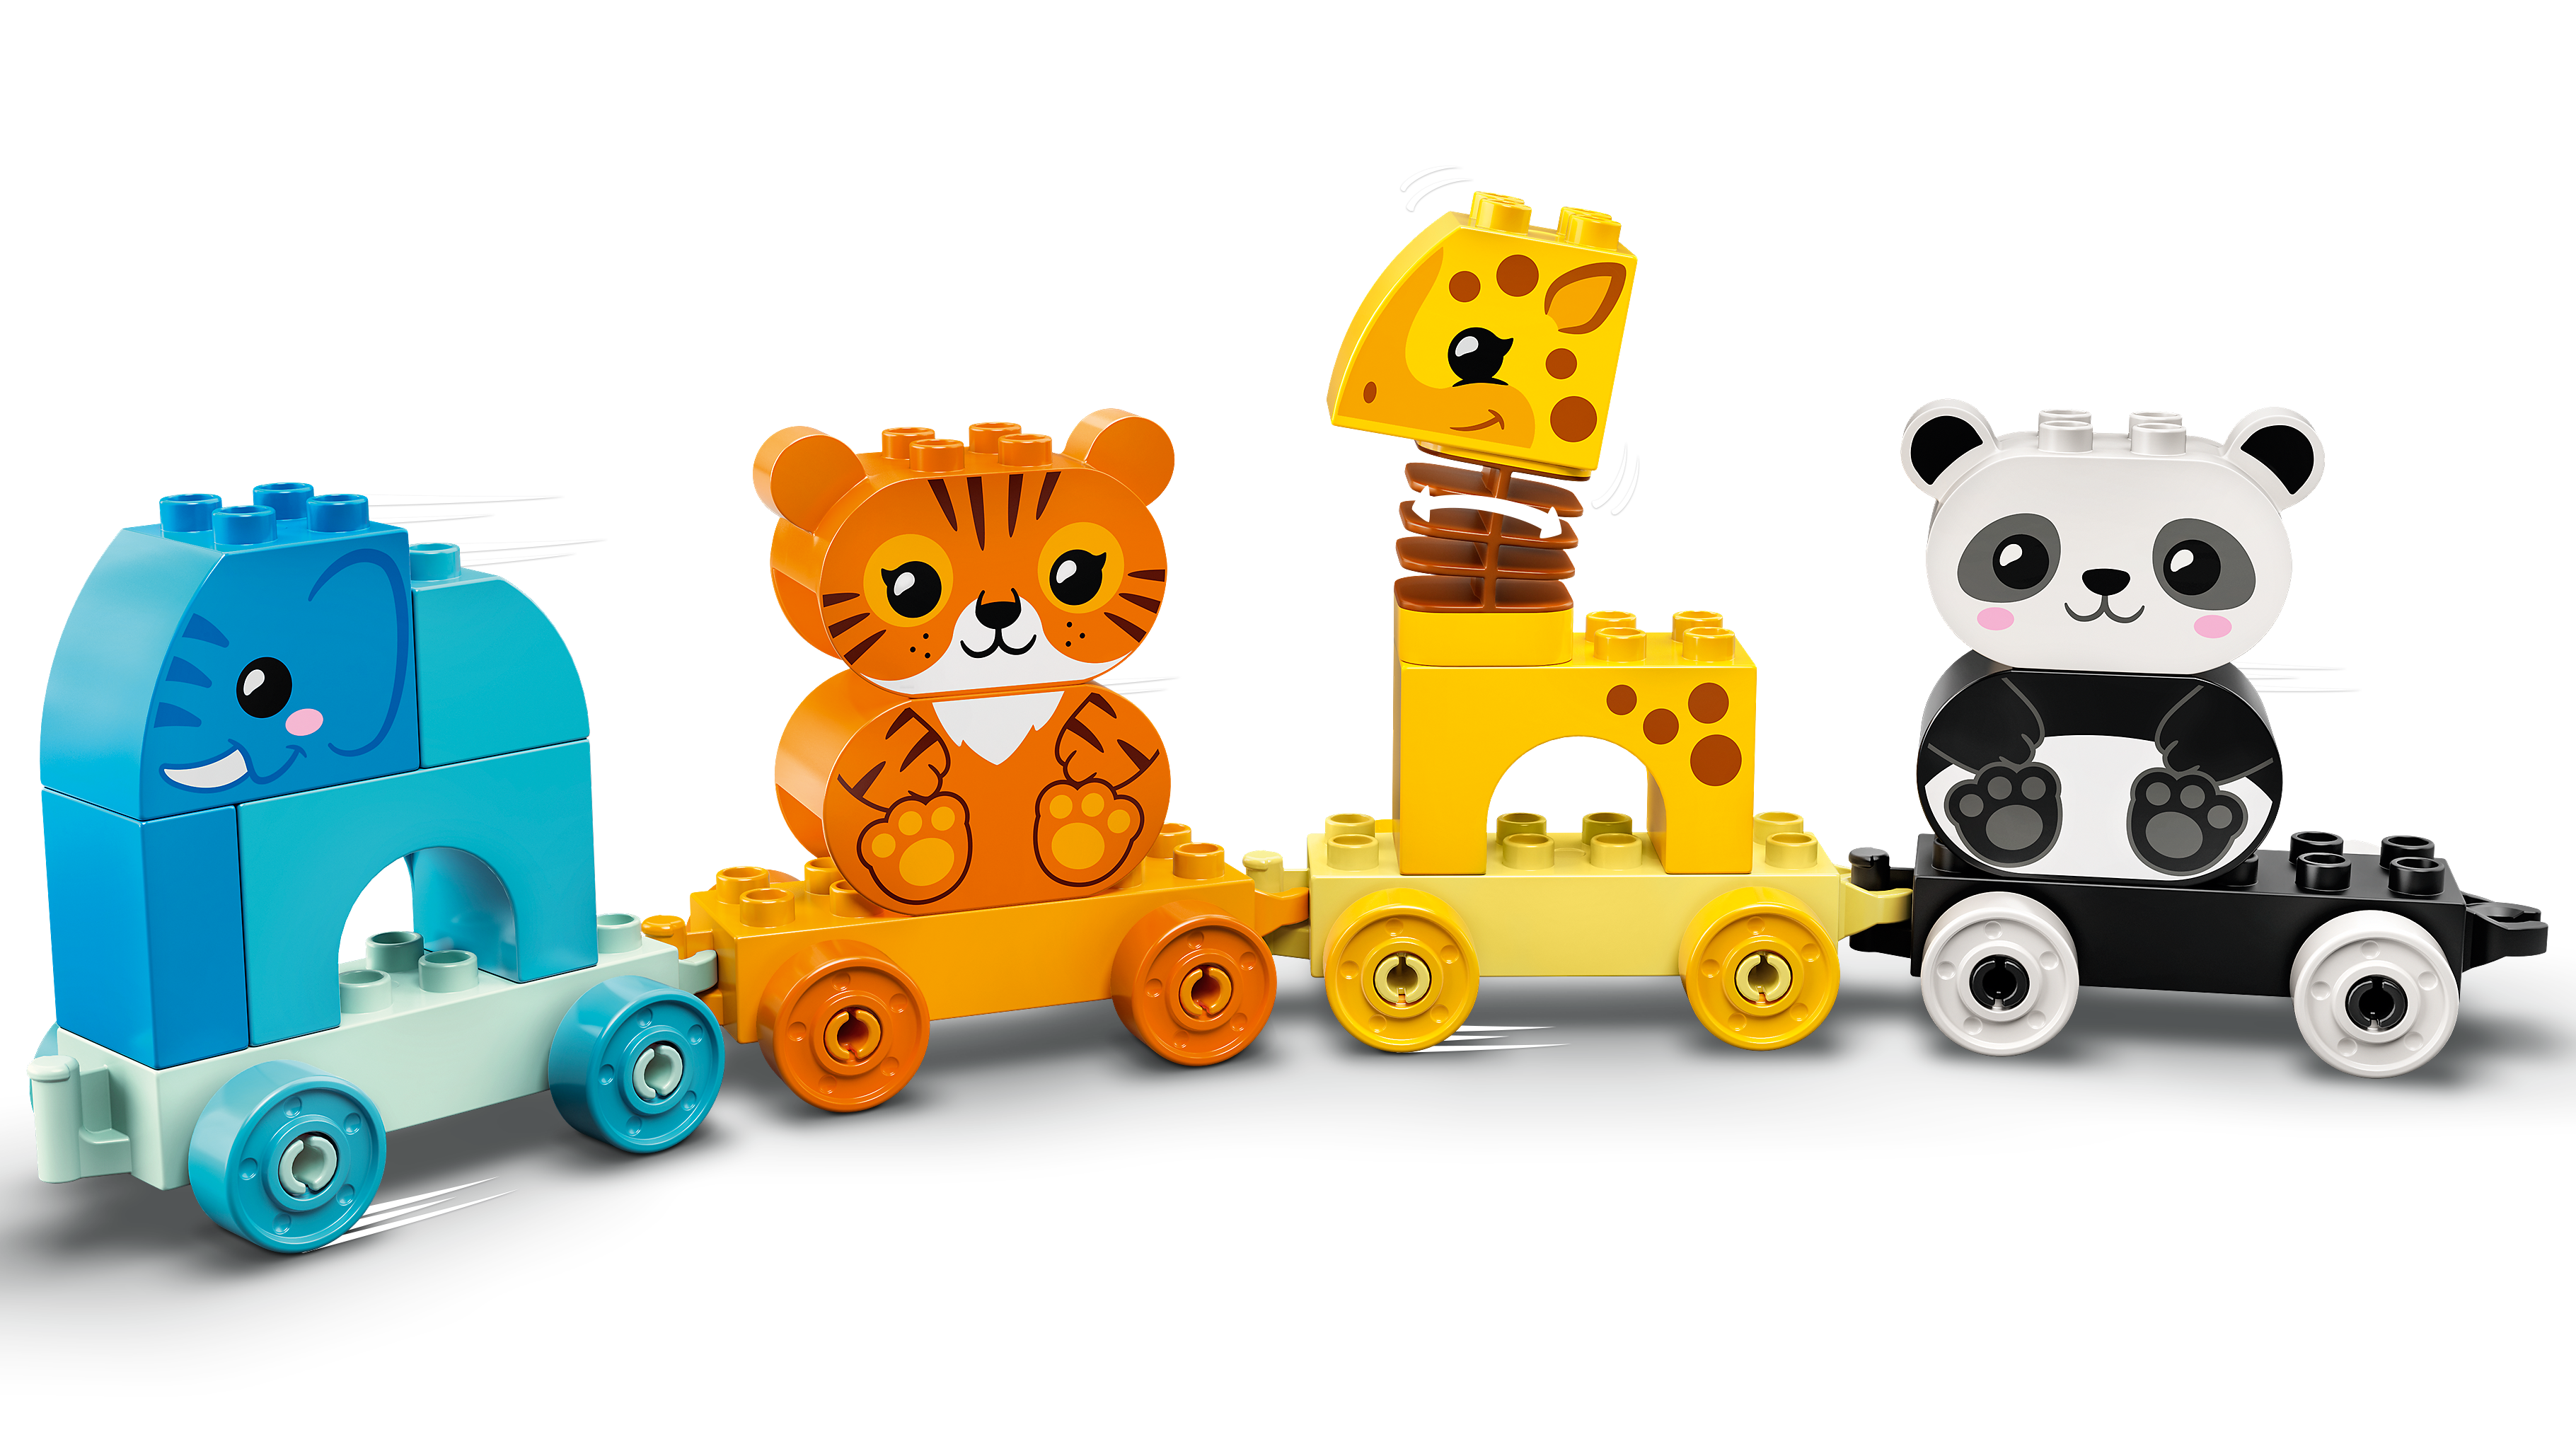 LEGO DUPLO My First Animal Train 10955, Toddler Train Set with